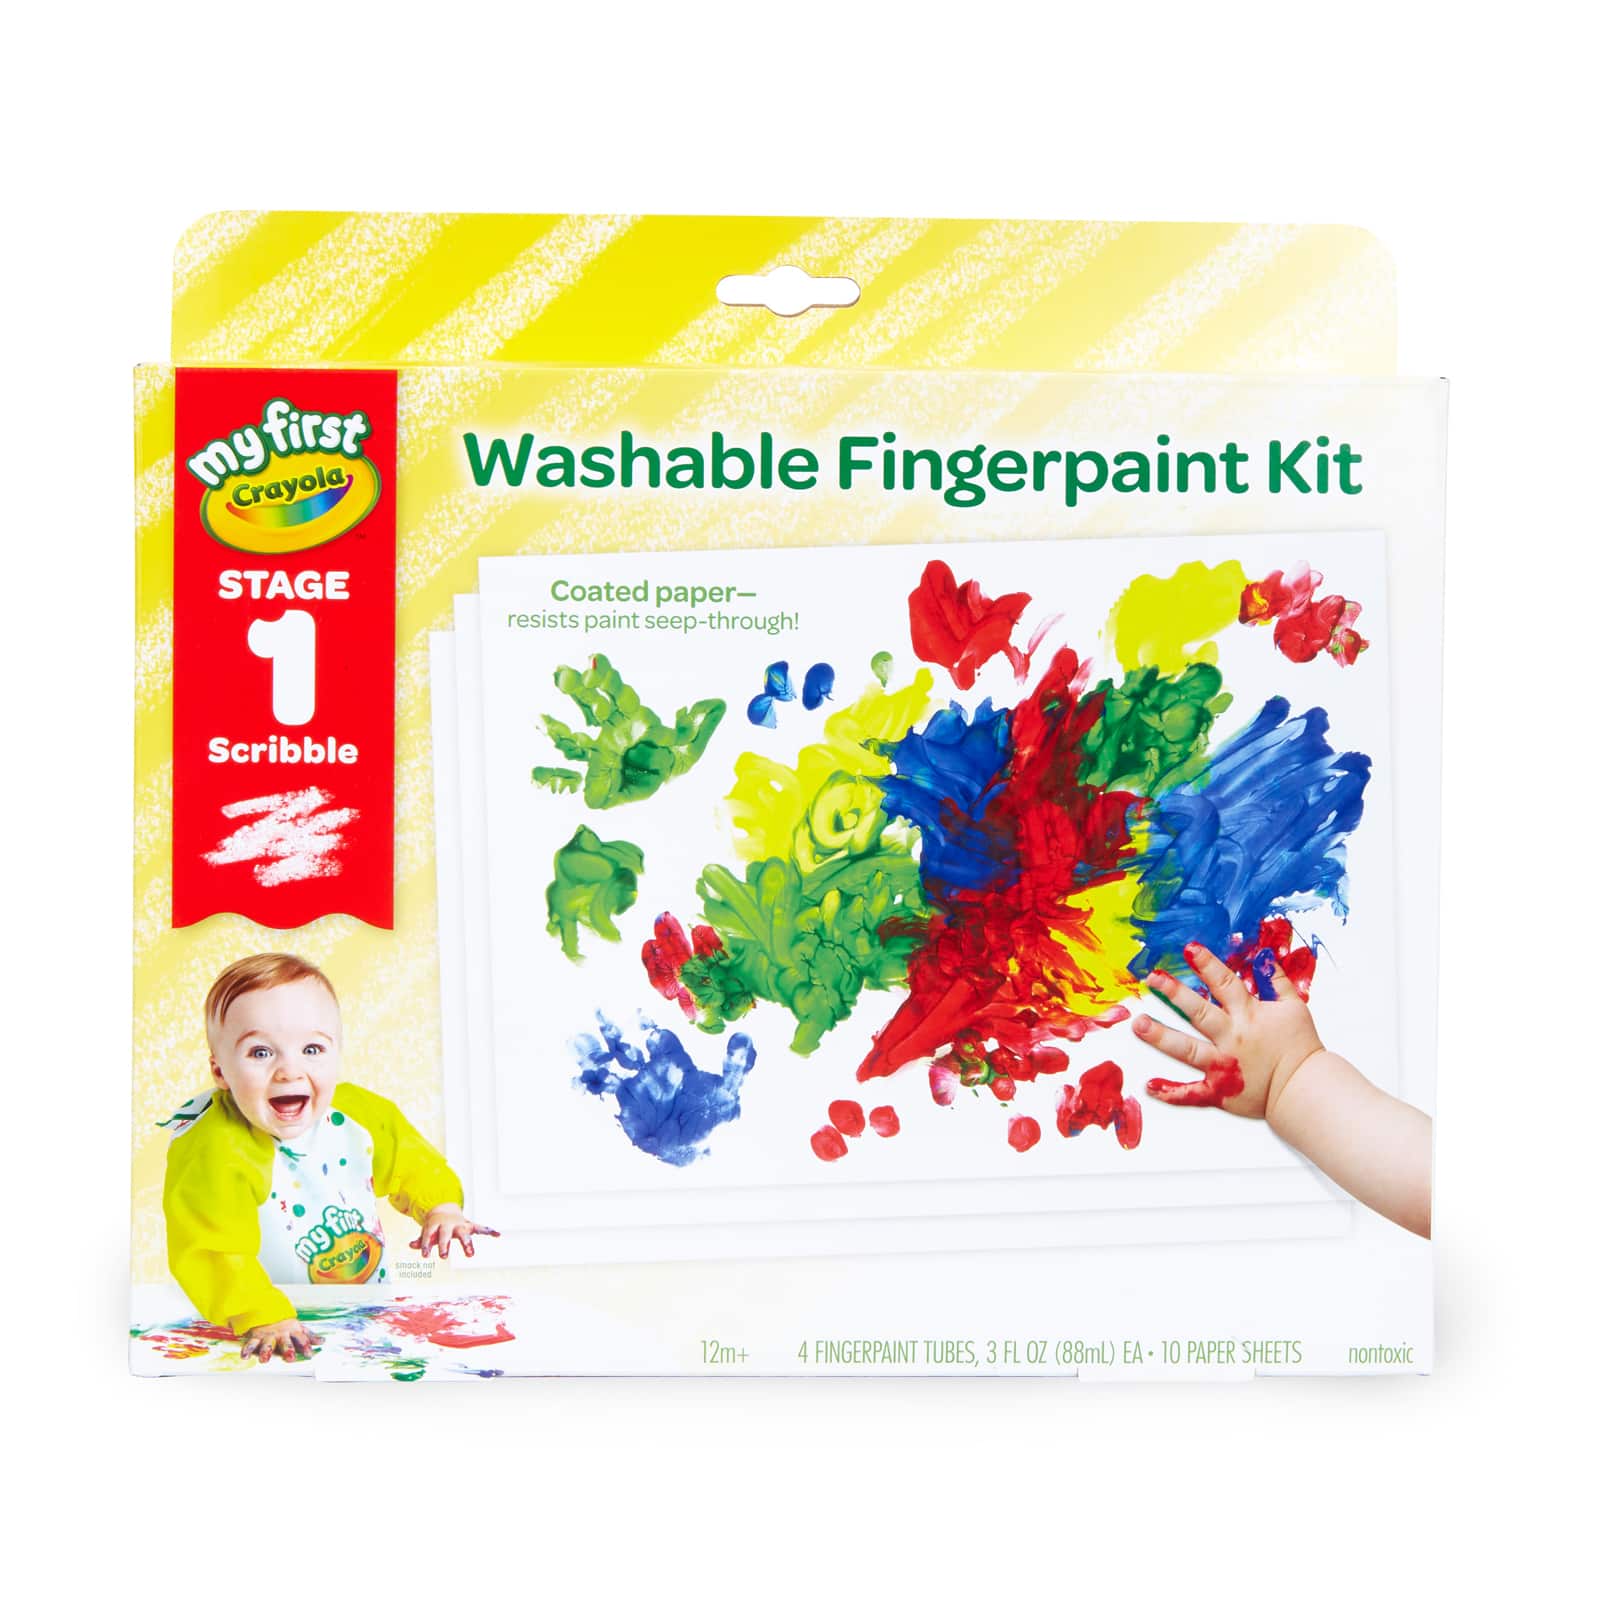 Buy the My First Crayola™ Washable Fingerpaint Kit, Stage 1 at Michaels